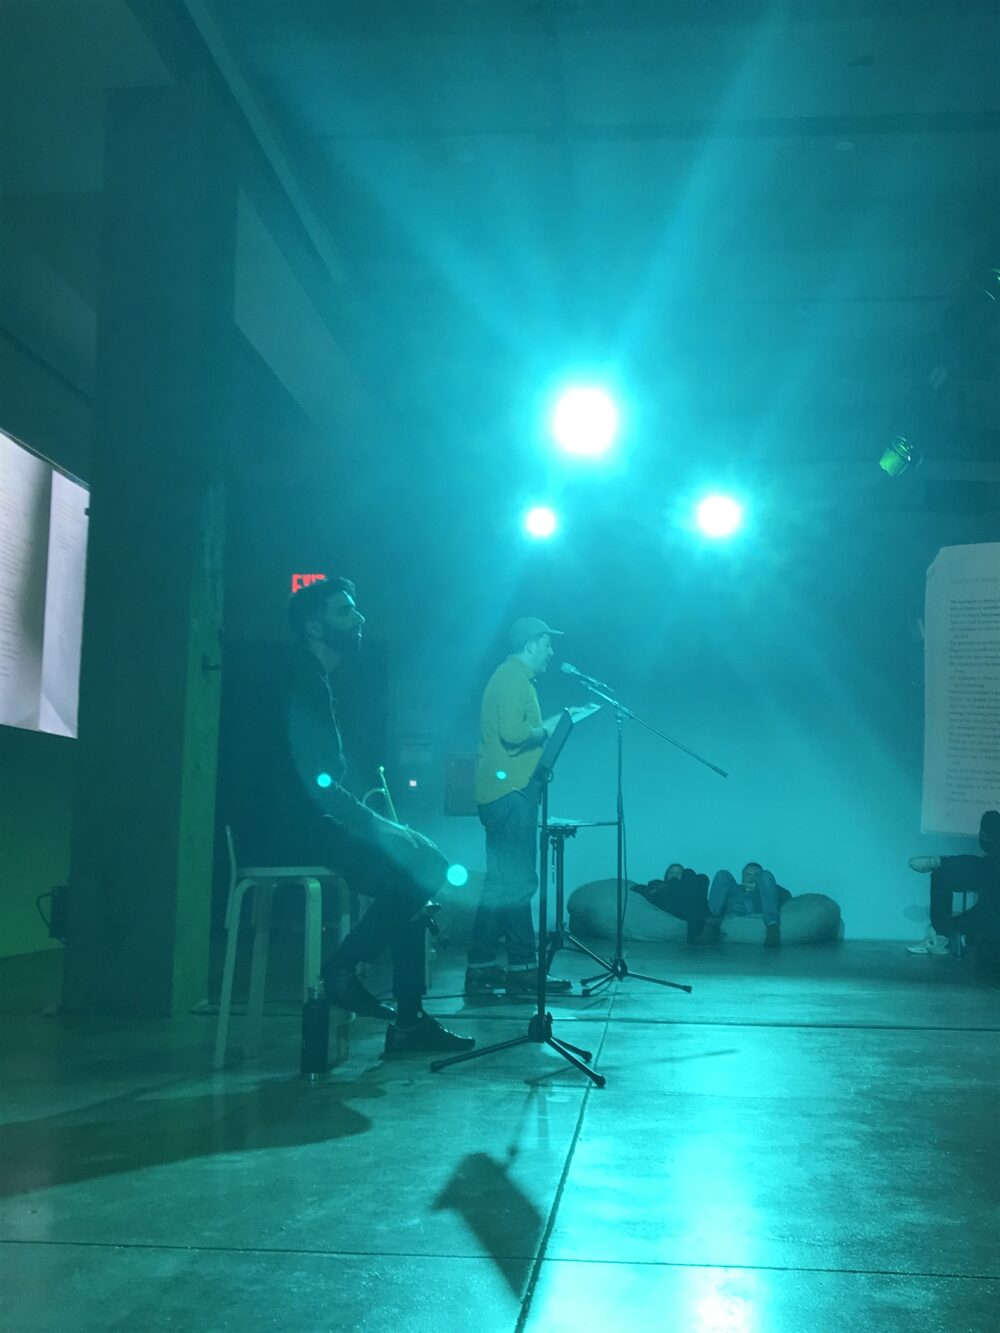 One man stands and another sits at the center of a room lit by aqua blue lights, causing the room to look as if it's underwater. The photo captures their profiles and was taken around 20 feet away. One man wears a hat and yellow shirt while the other wears dark clothes and holds a trumpet.